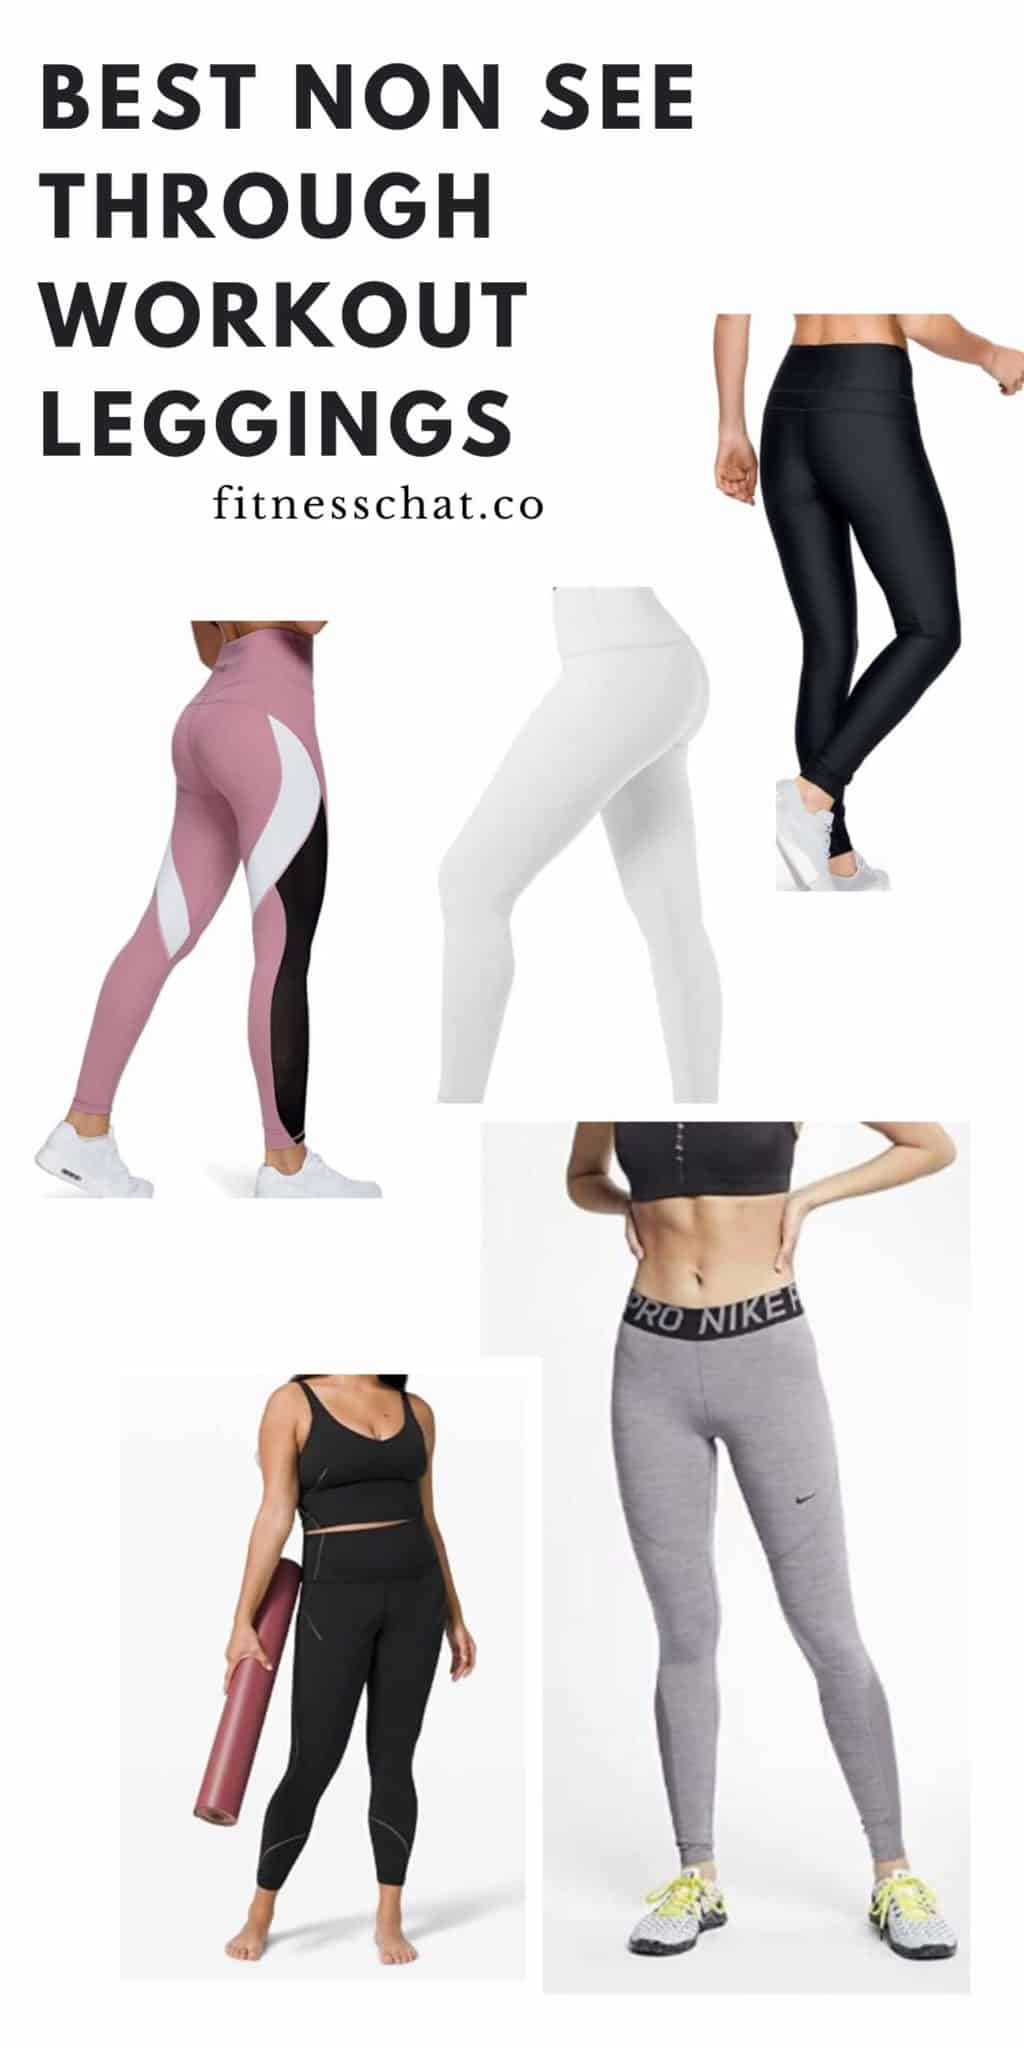 Best workout leggings for getting your sweat on - Daily Mail